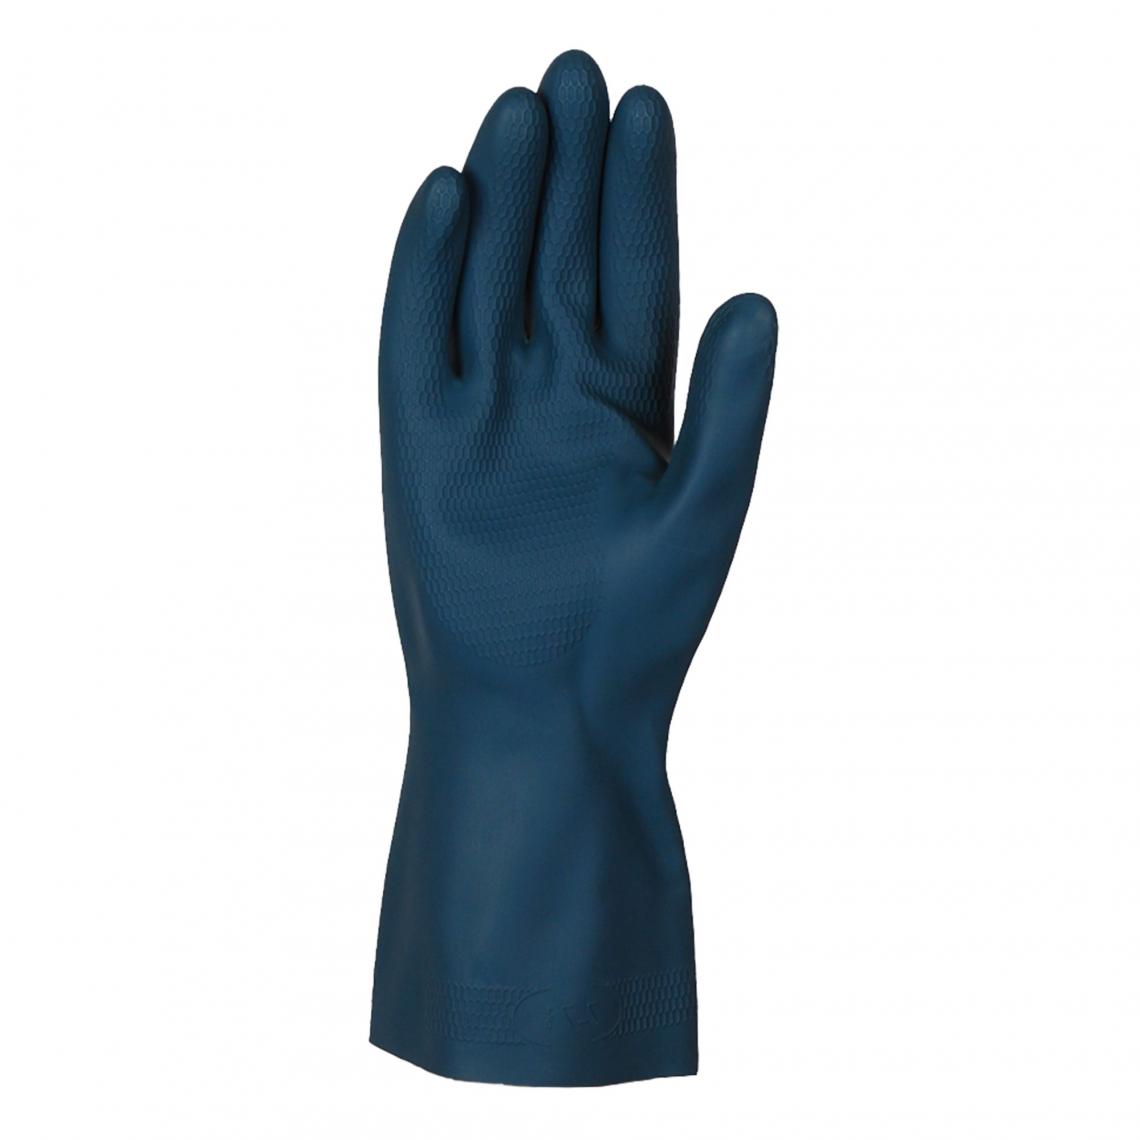 Horizon Black Heavyweight Industrial Rubber Gloves - Pack of 12 Pairs Work Gloves and Hats - Cleanflow